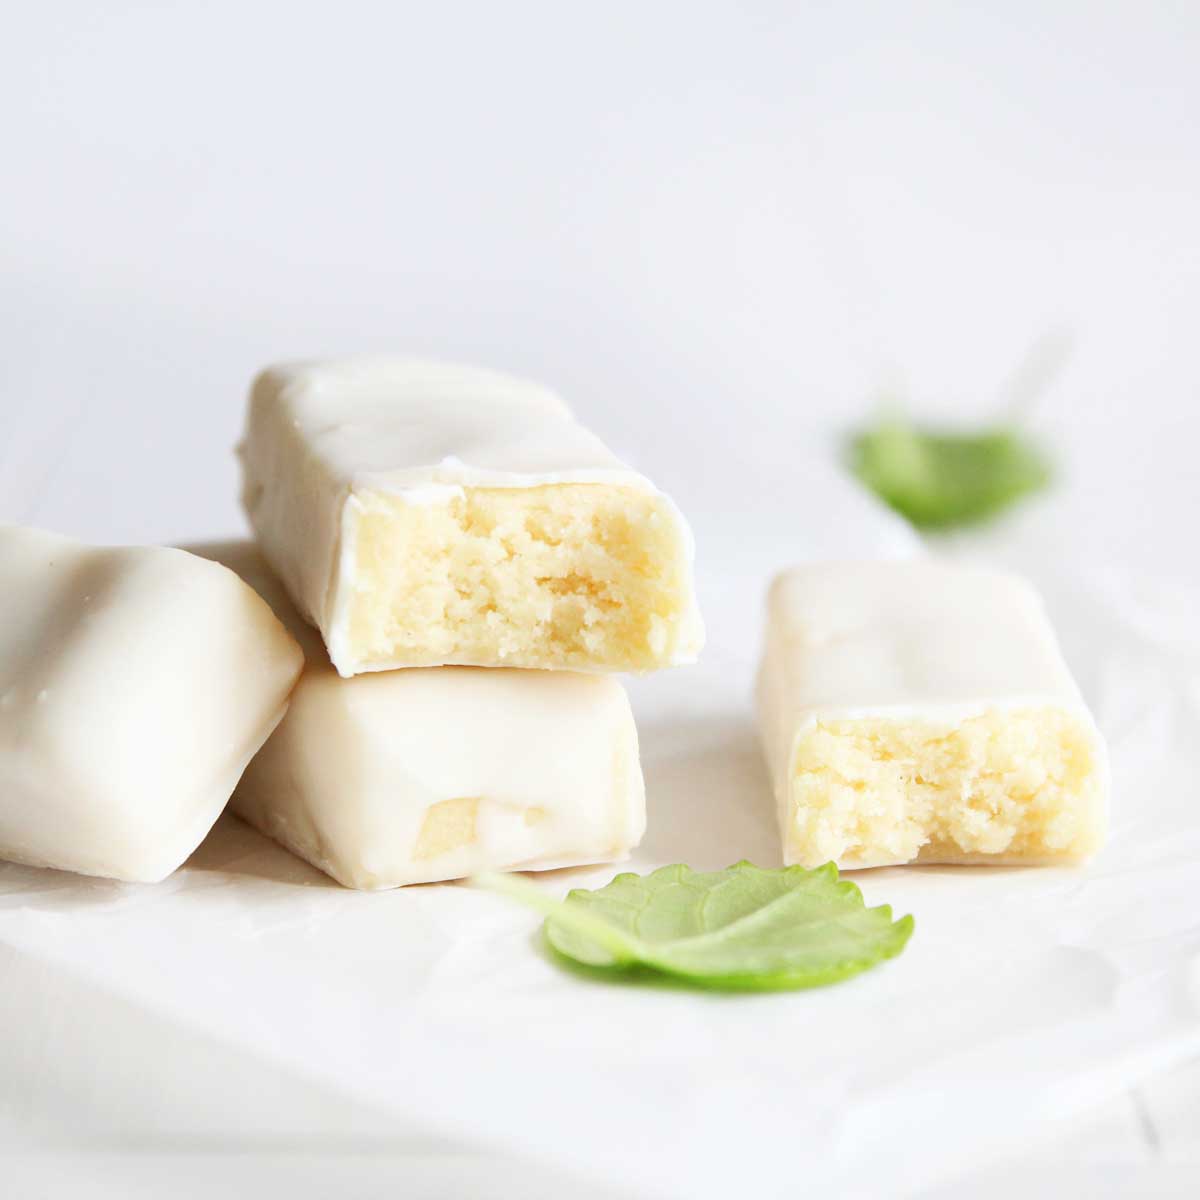 Healthy Homemade Lemon Protein Bars made with Collagen Peptides - sweet potato mochi